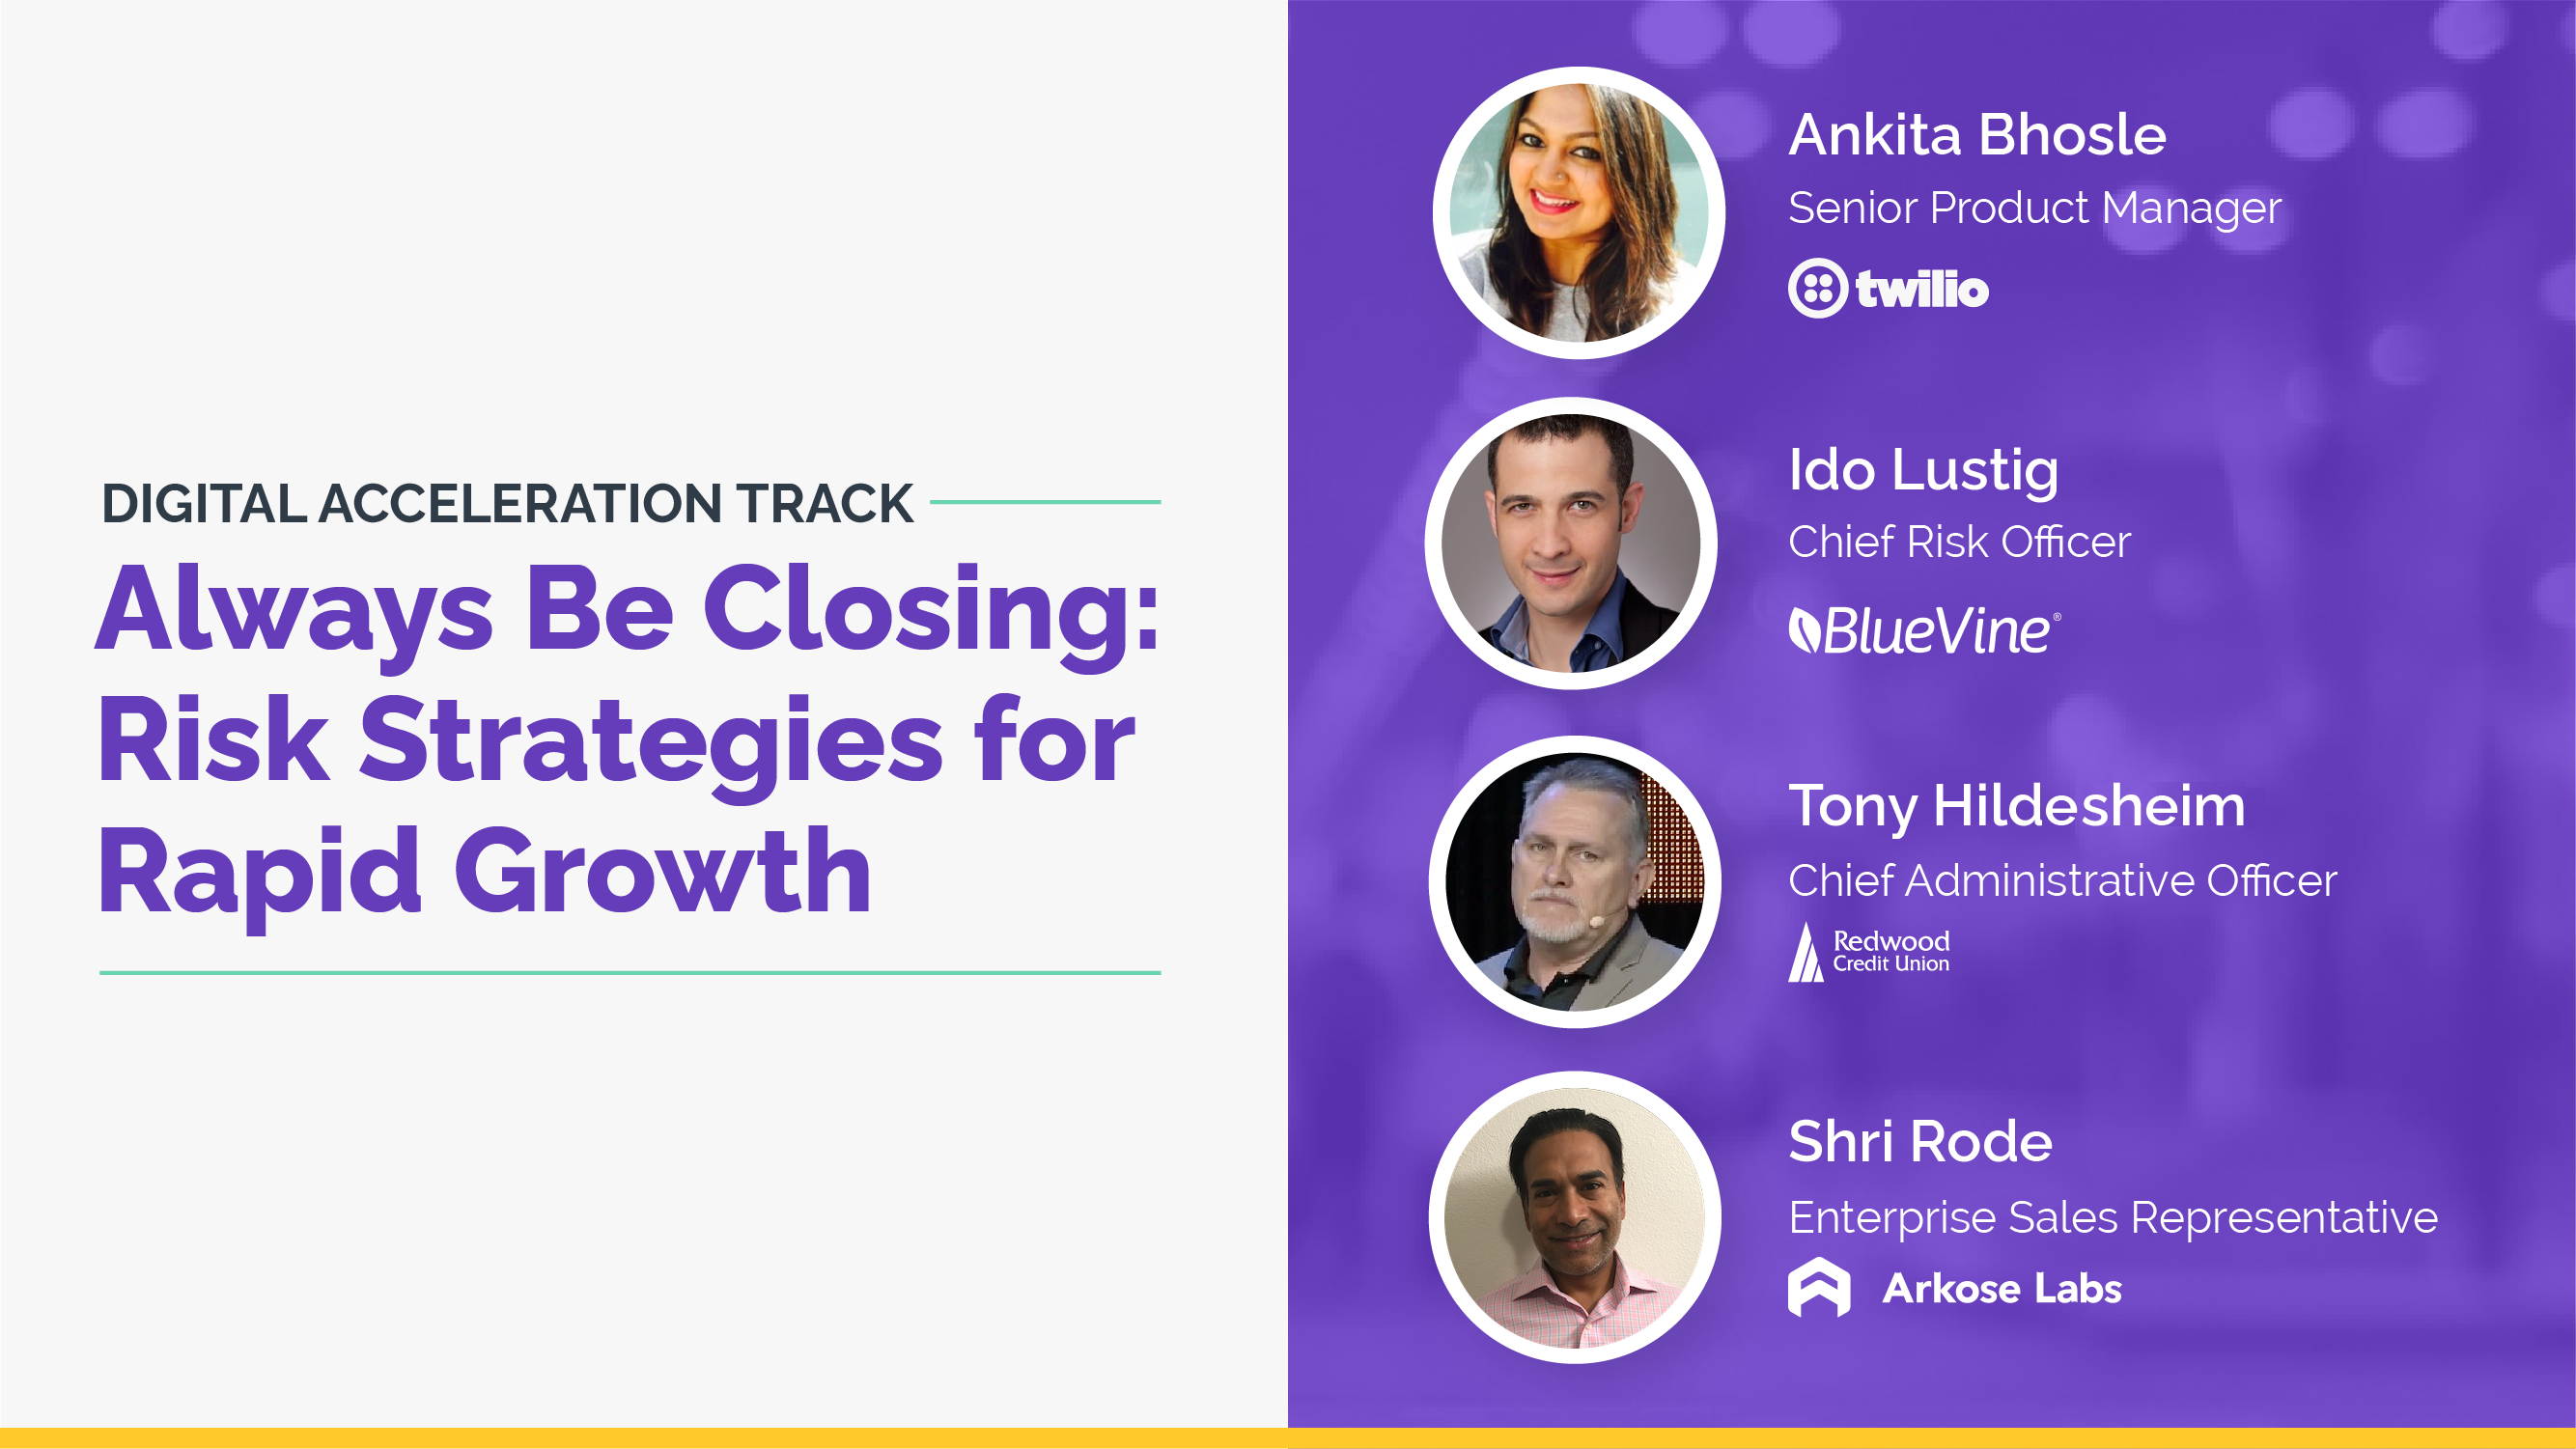 Digital Acceleration Track Always Be Closing: Risk Strategies for Rapid Growth